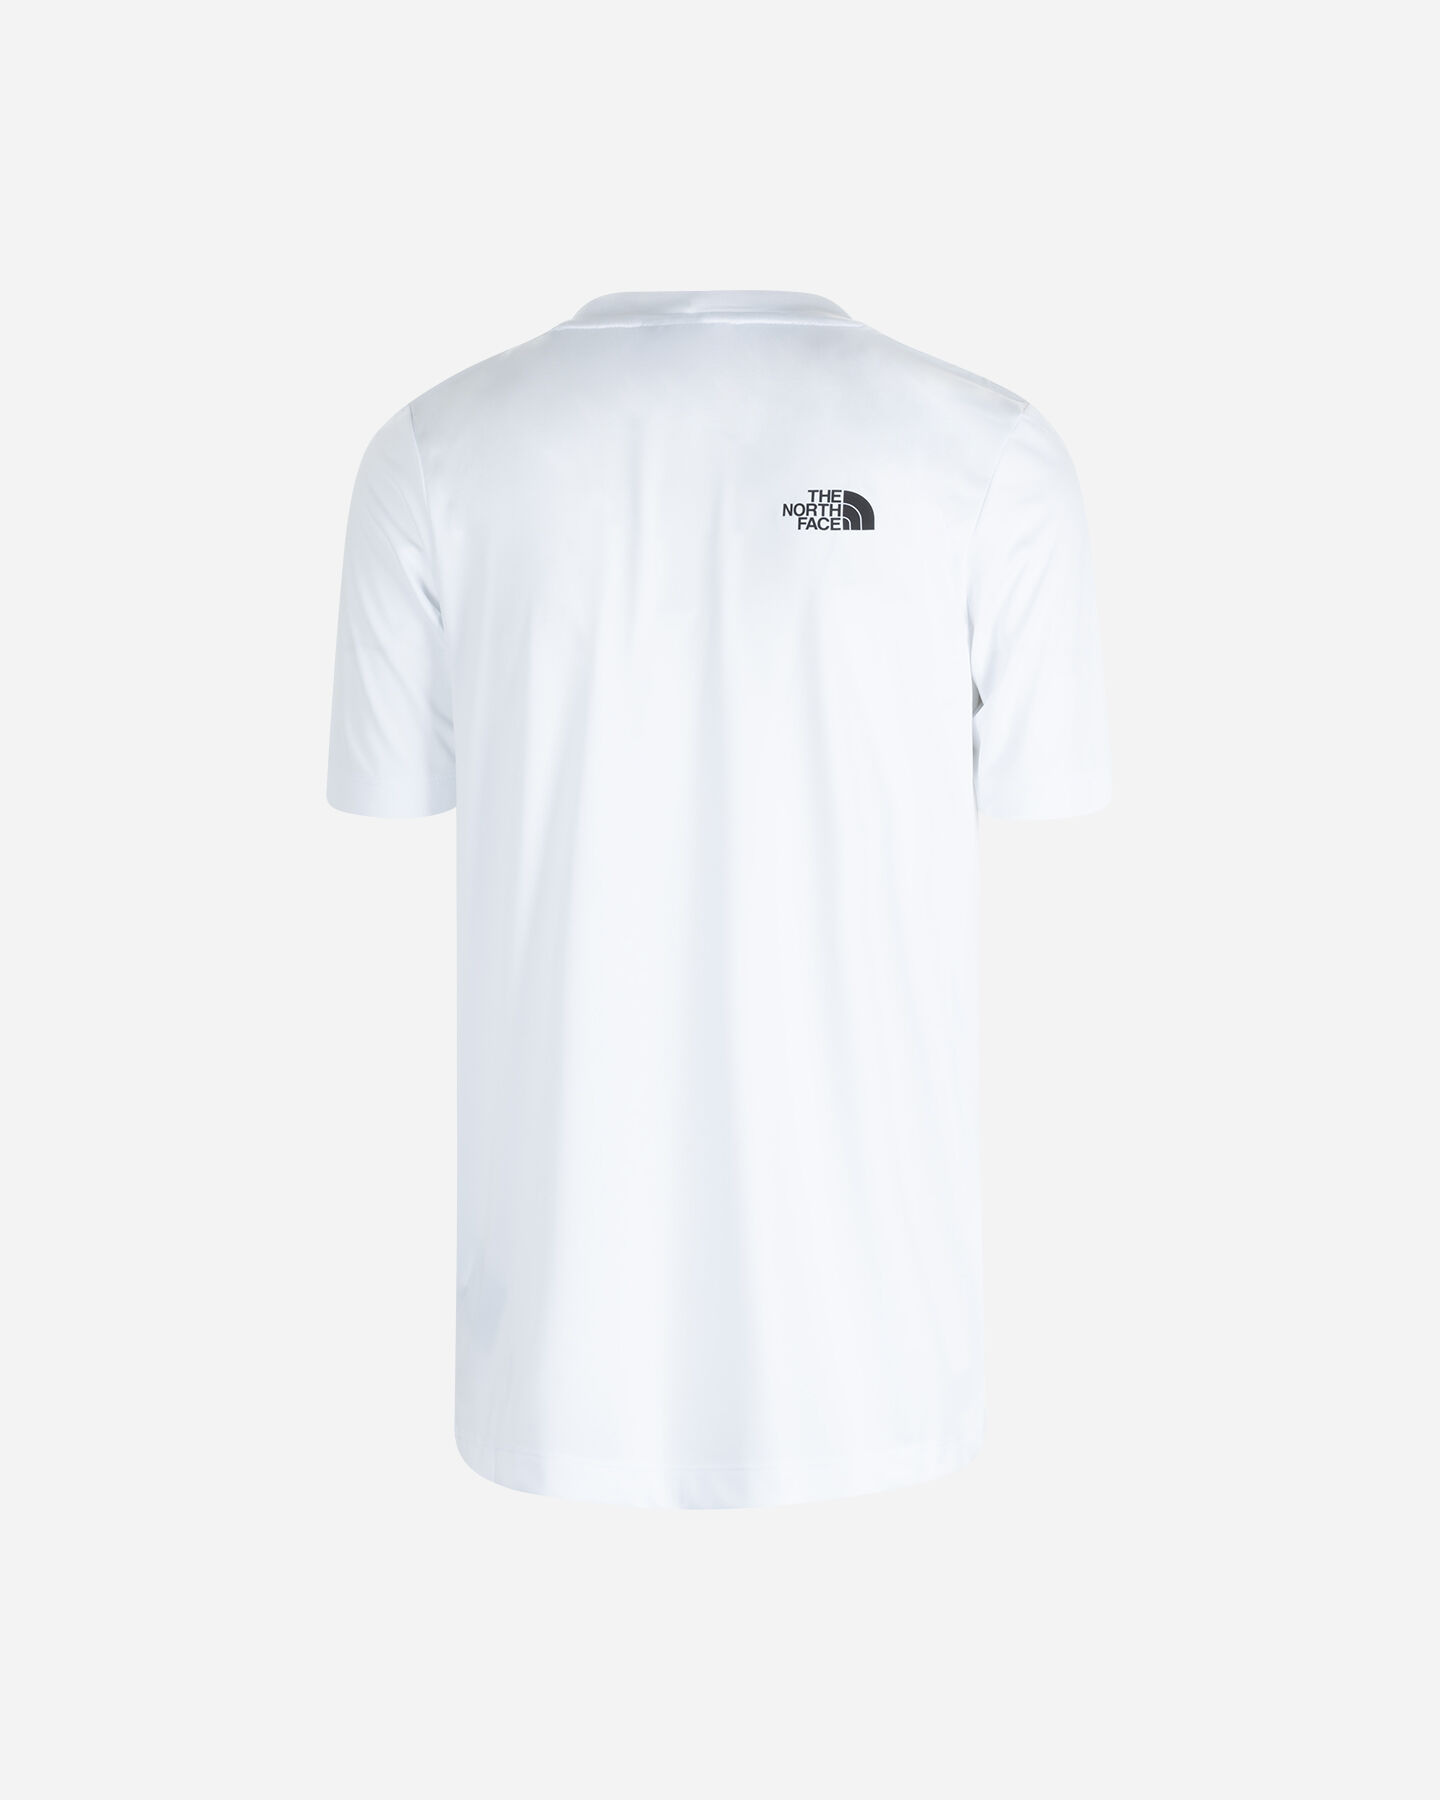  T-Shirt THE NORTH FACE NEW ODLES TECH M S5537276 scatto 1